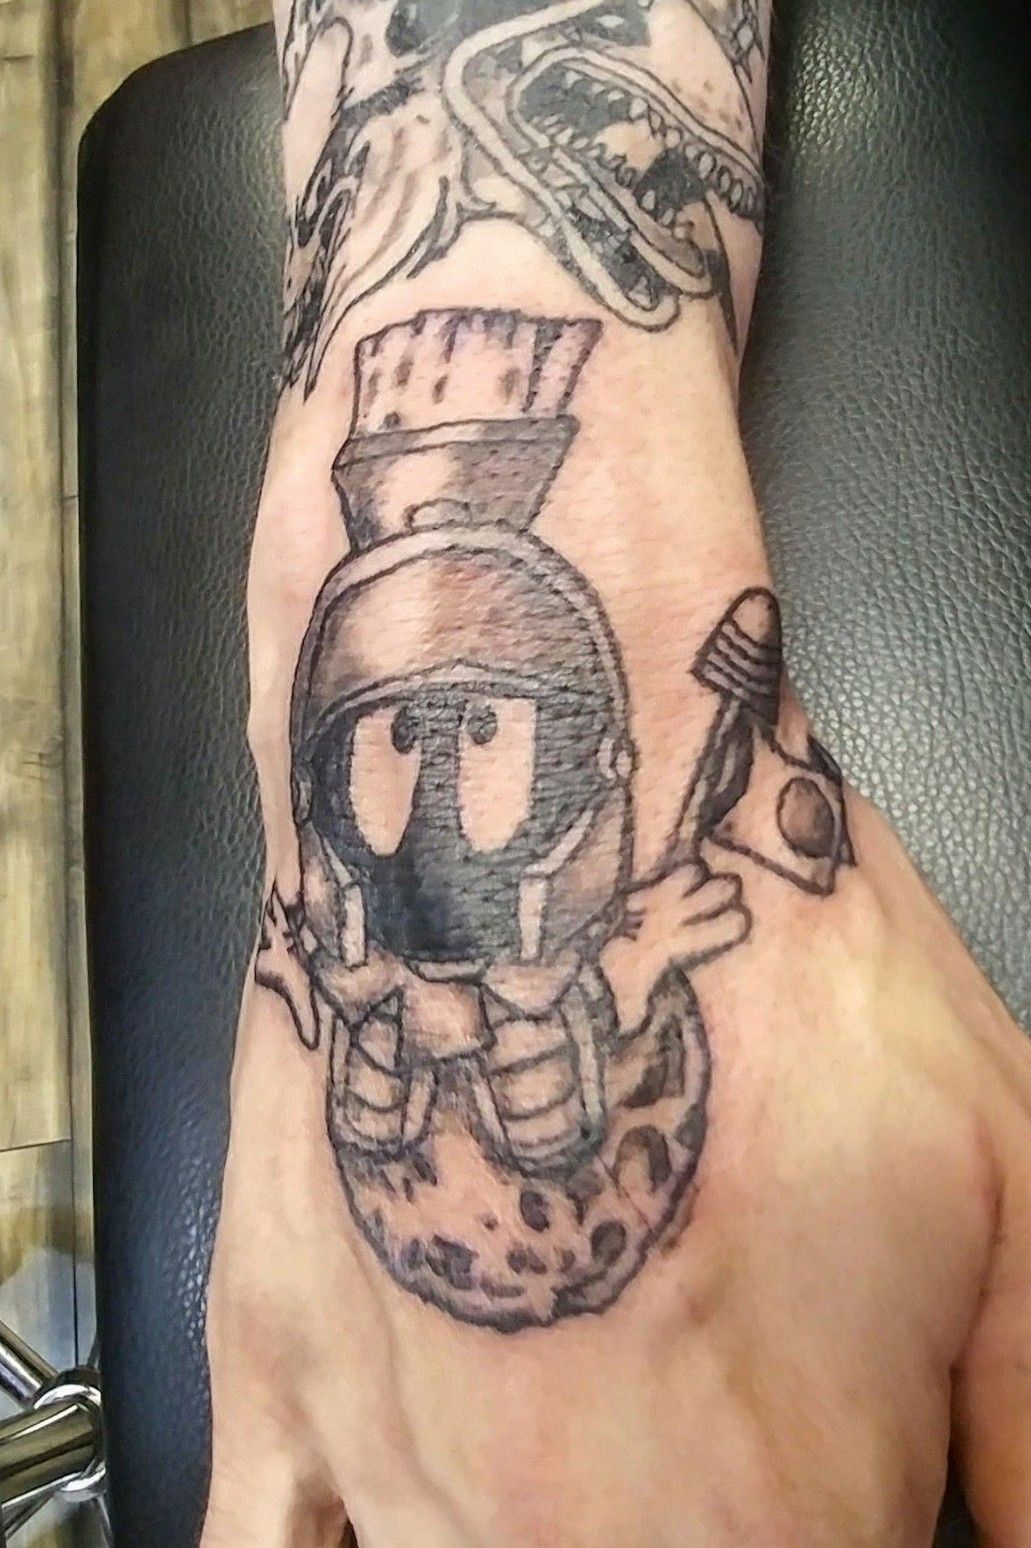 Tezz Tattoo  New Marvin The Martian Tattoo Addition the  Facebook